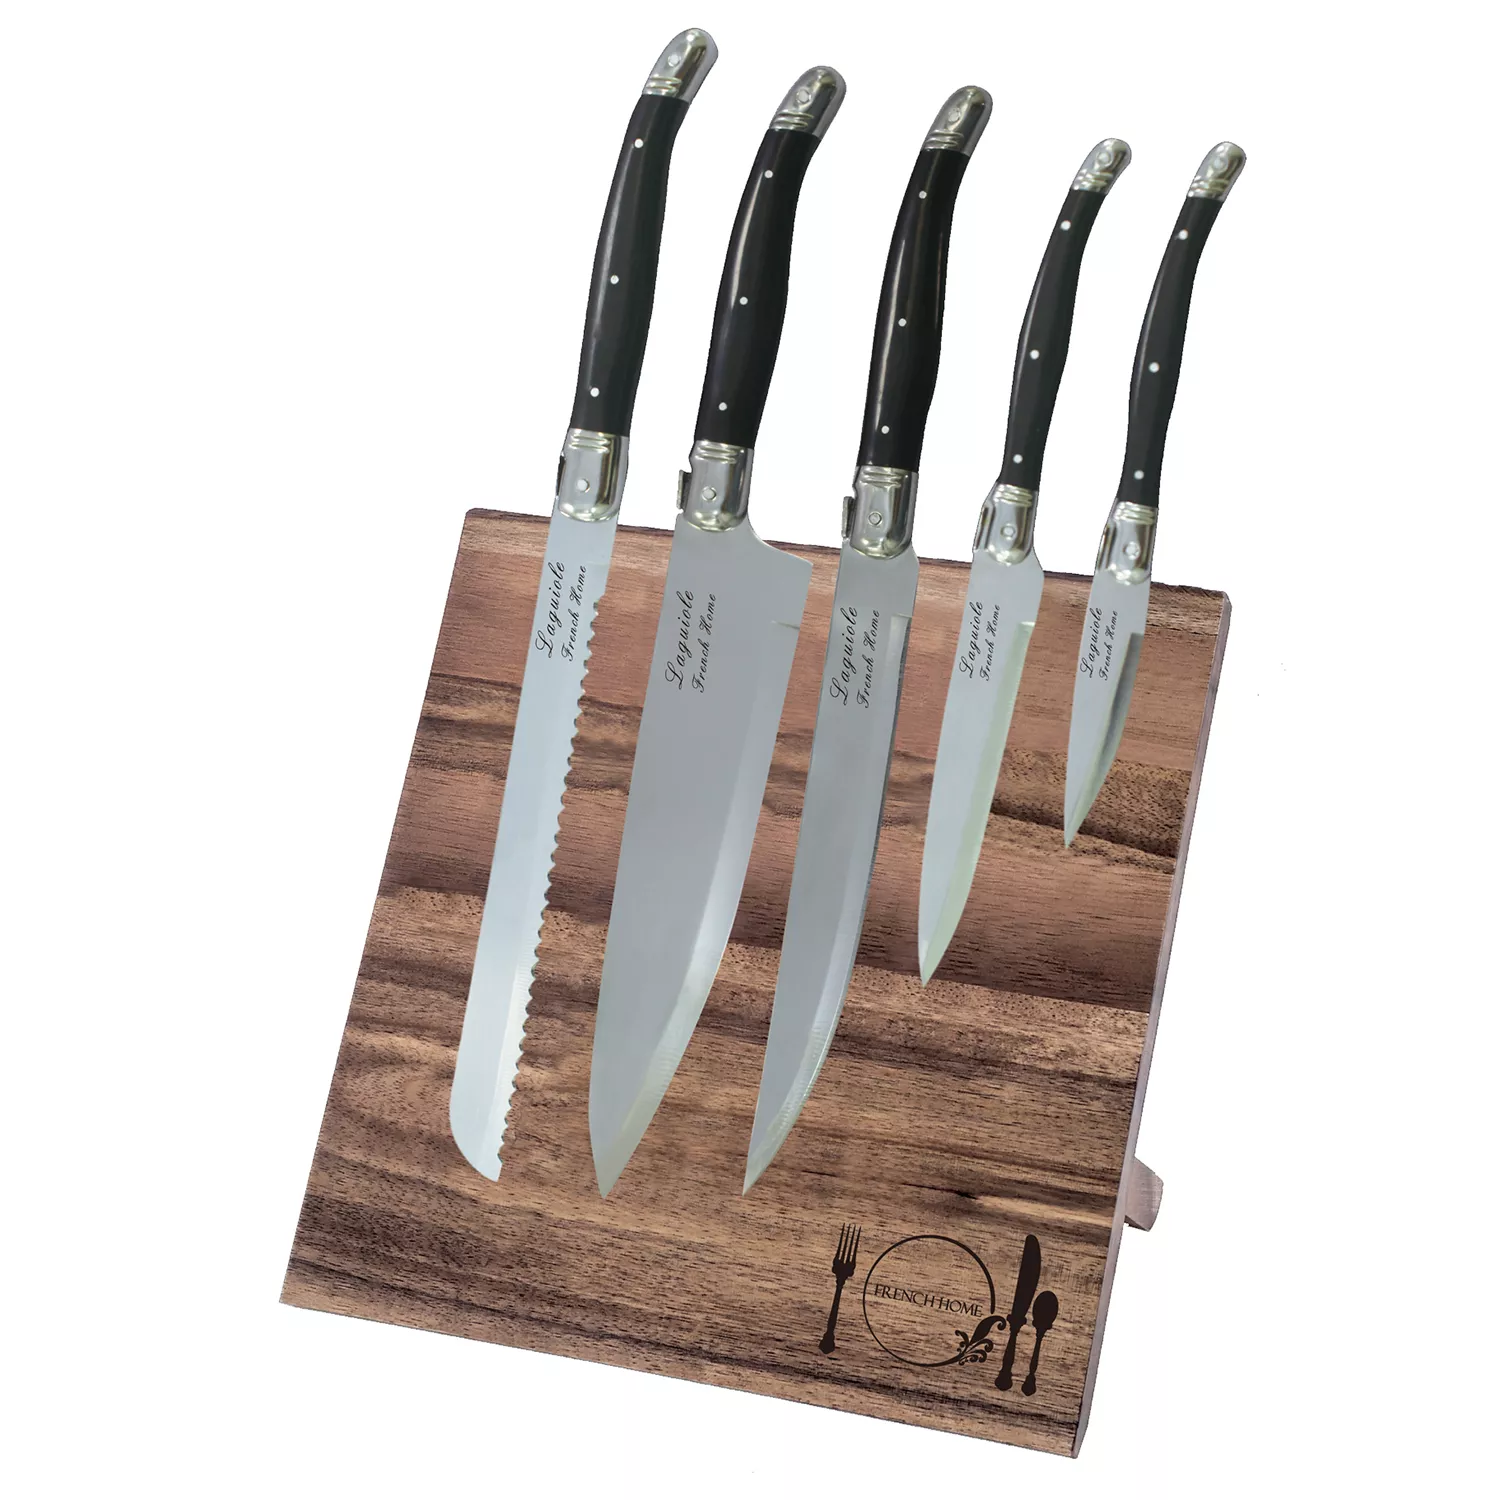 Classic Cuisine 10-Piece Multi Colored Knife Set with Magnetic Bar